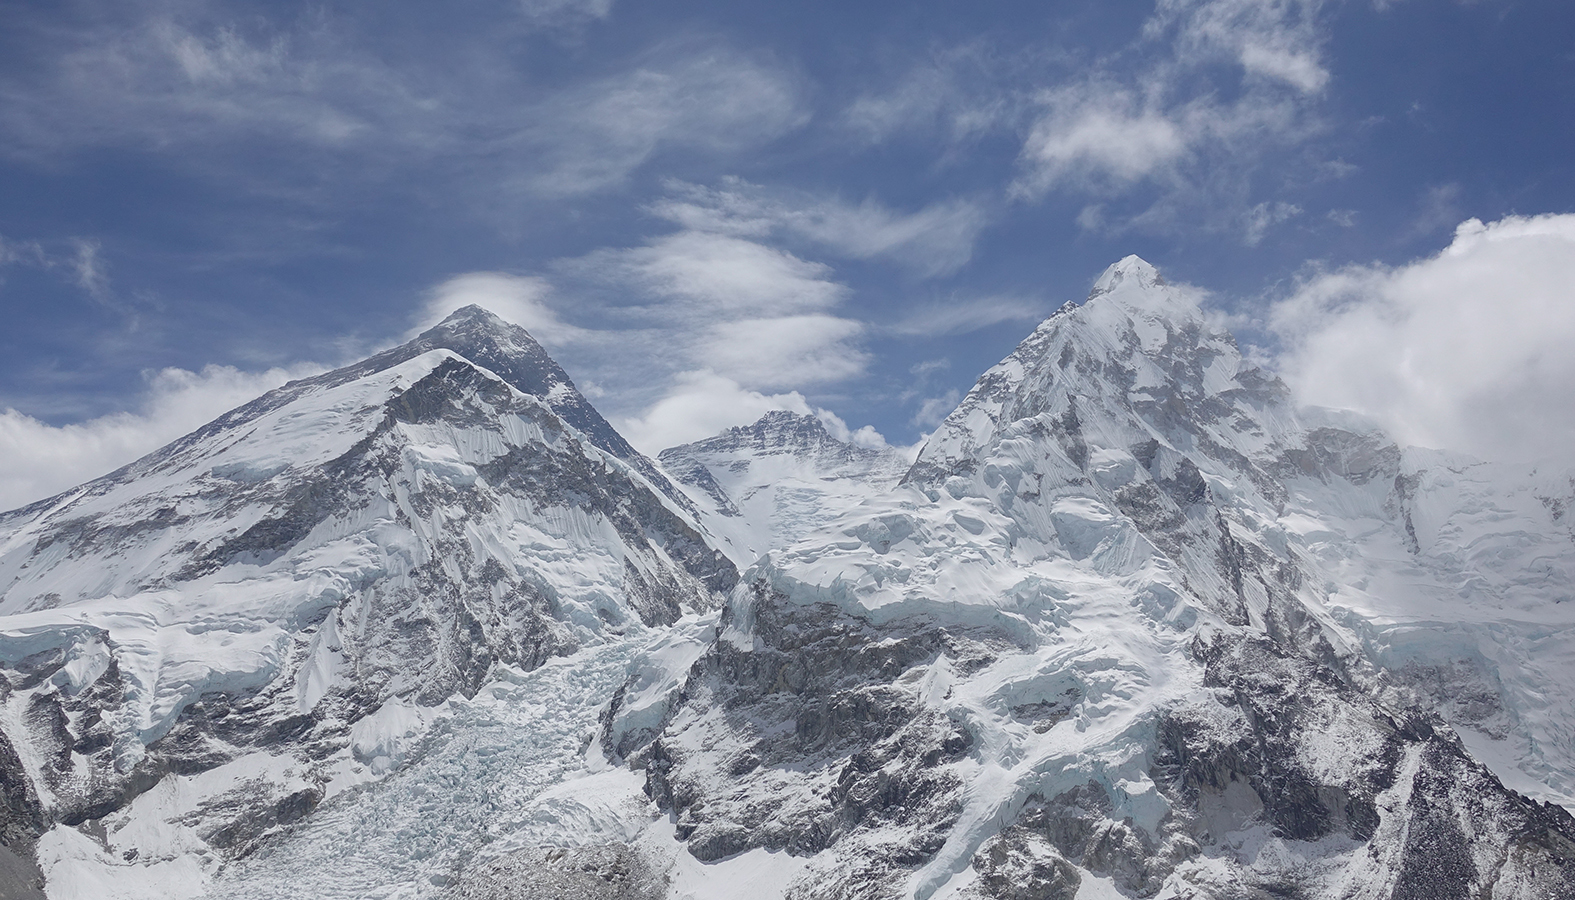 The Triple Crown consisting of Mounts Everest, Lhotse and Nuptse.